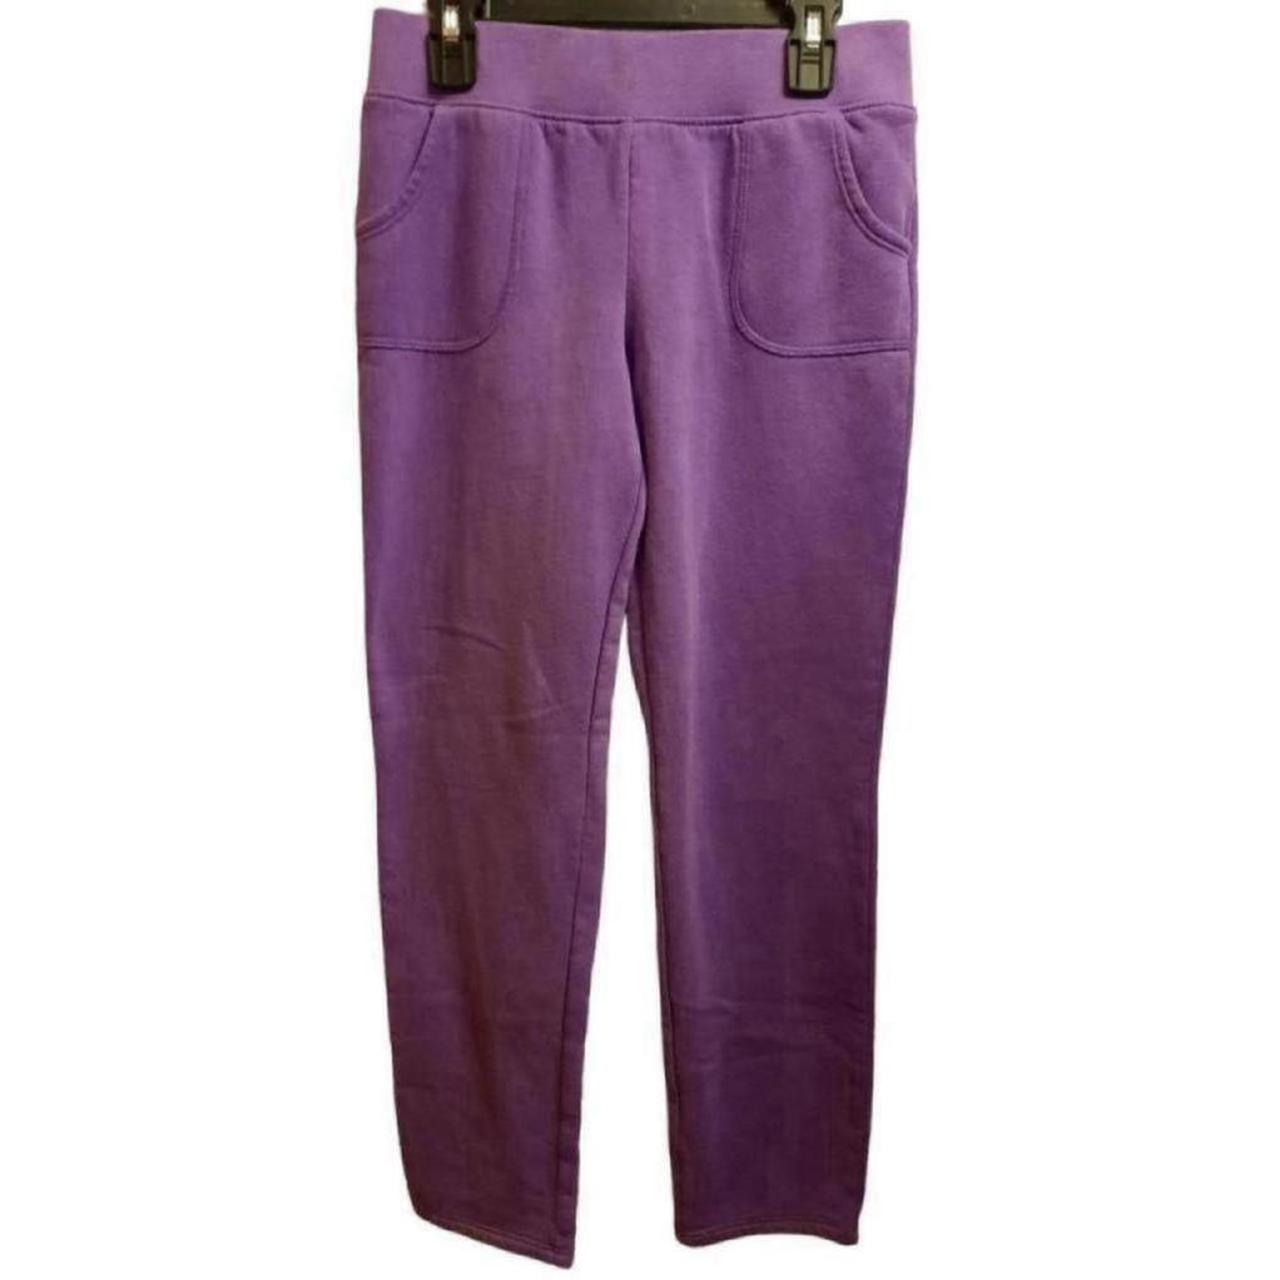 Athletic Works Cotton Athletic Pants for Women